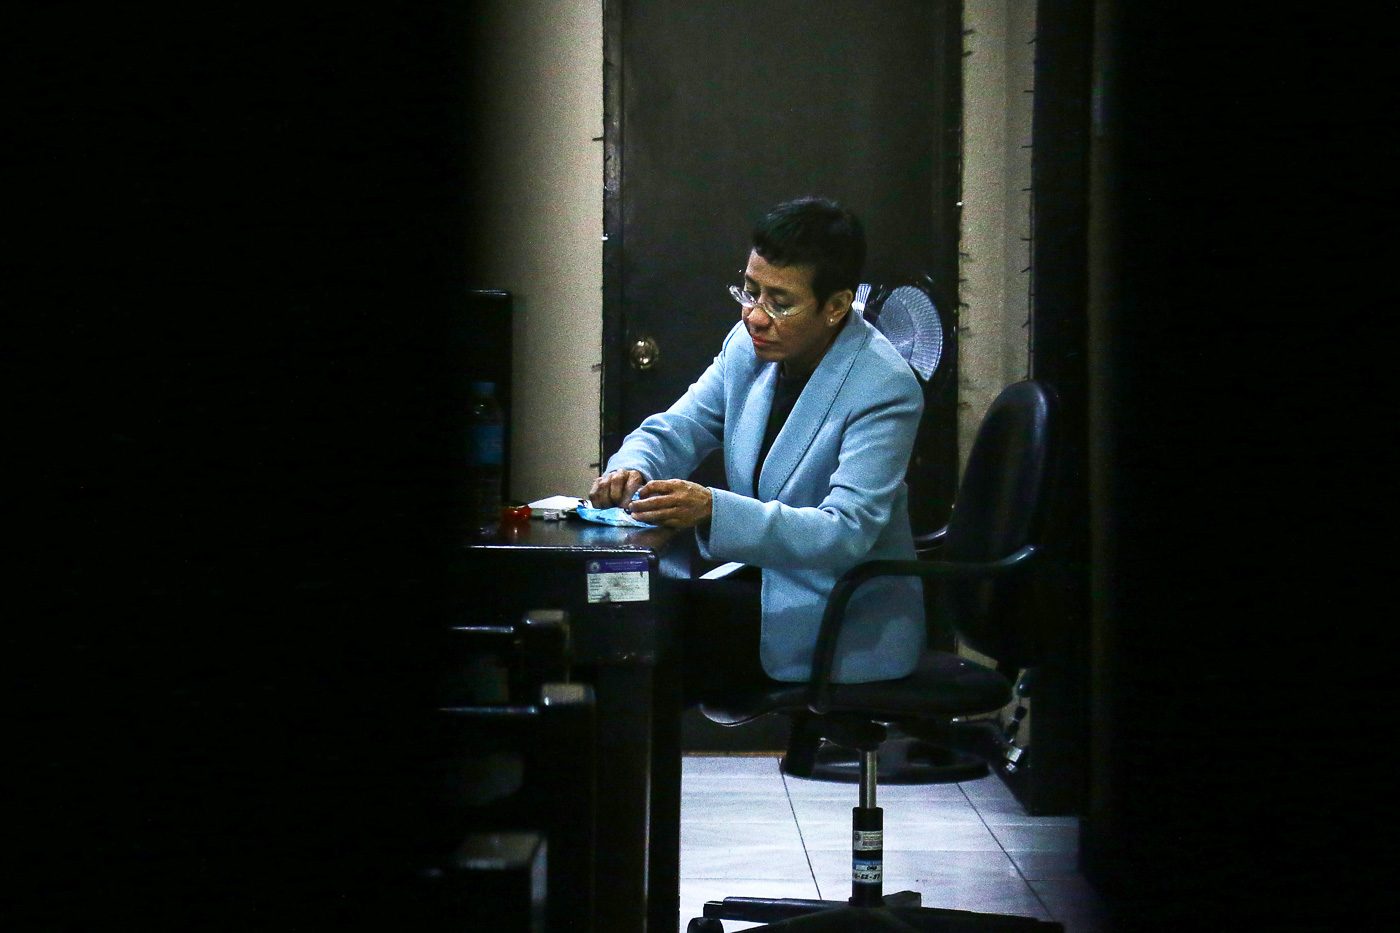 Tax court denies Maria Ressa appeal, to proceed with trial